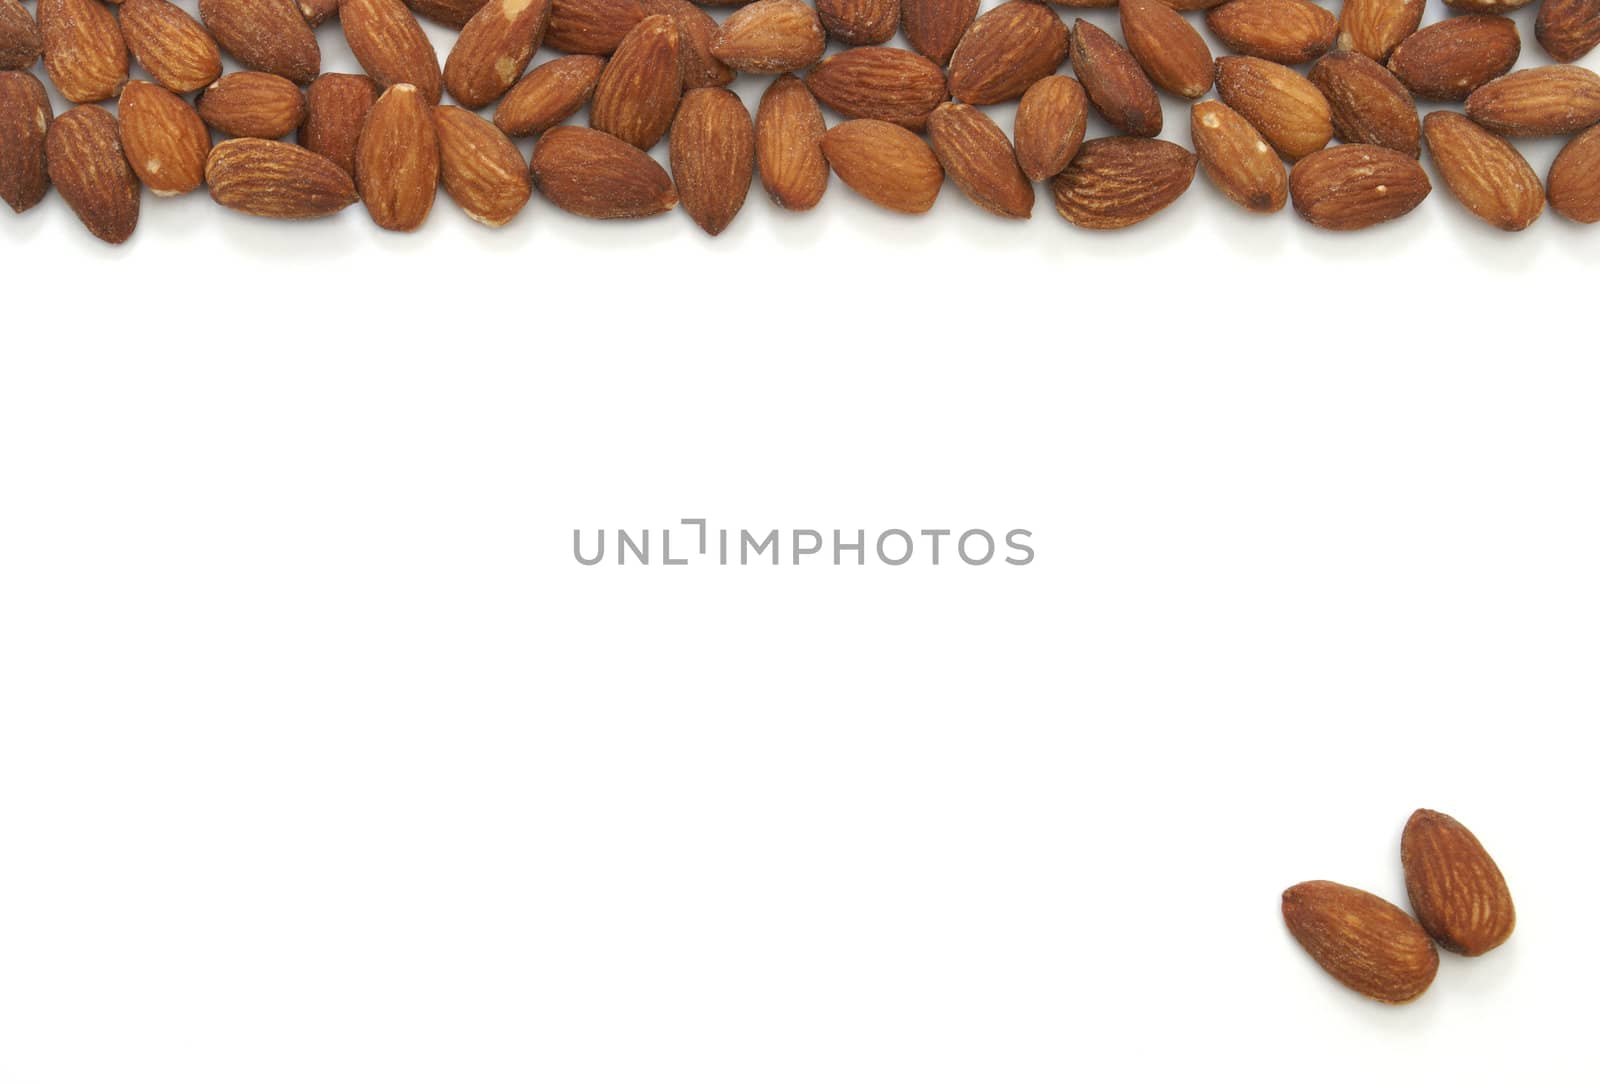 An almond pile at the top and two seperate almonds on the bottom.